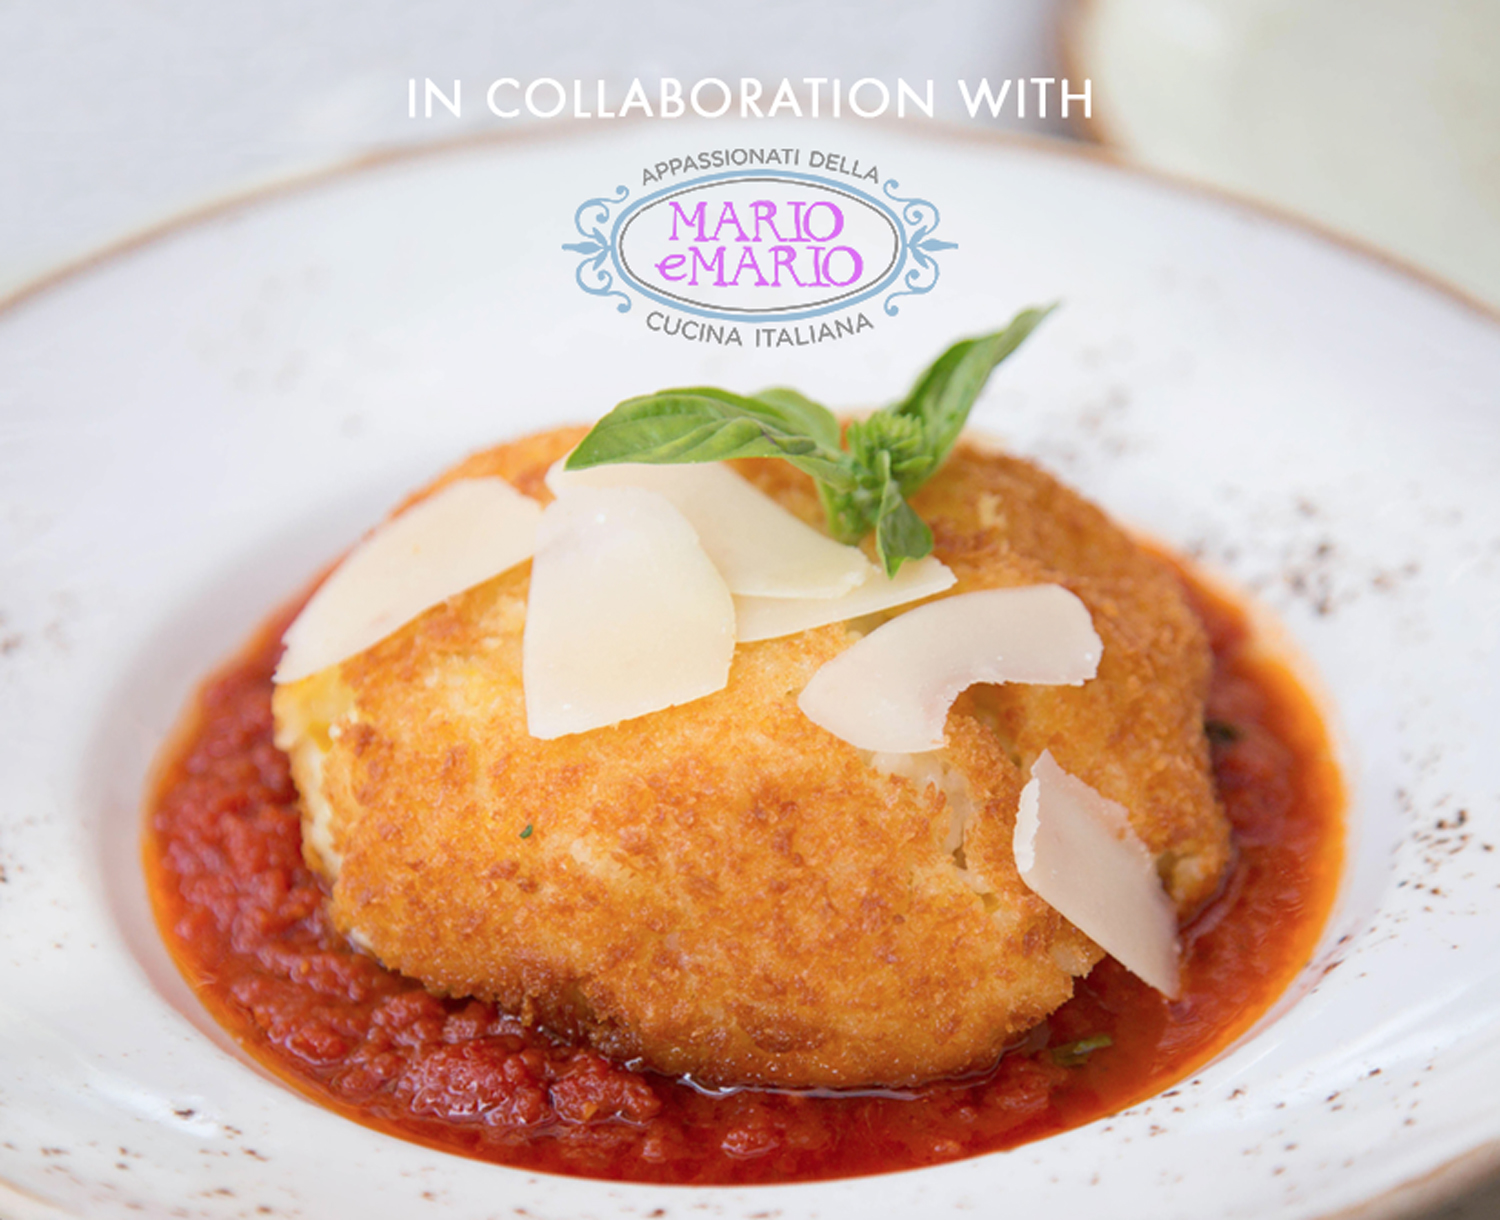 Authentic Italian Cooking in Collaboration with Mario e Mario